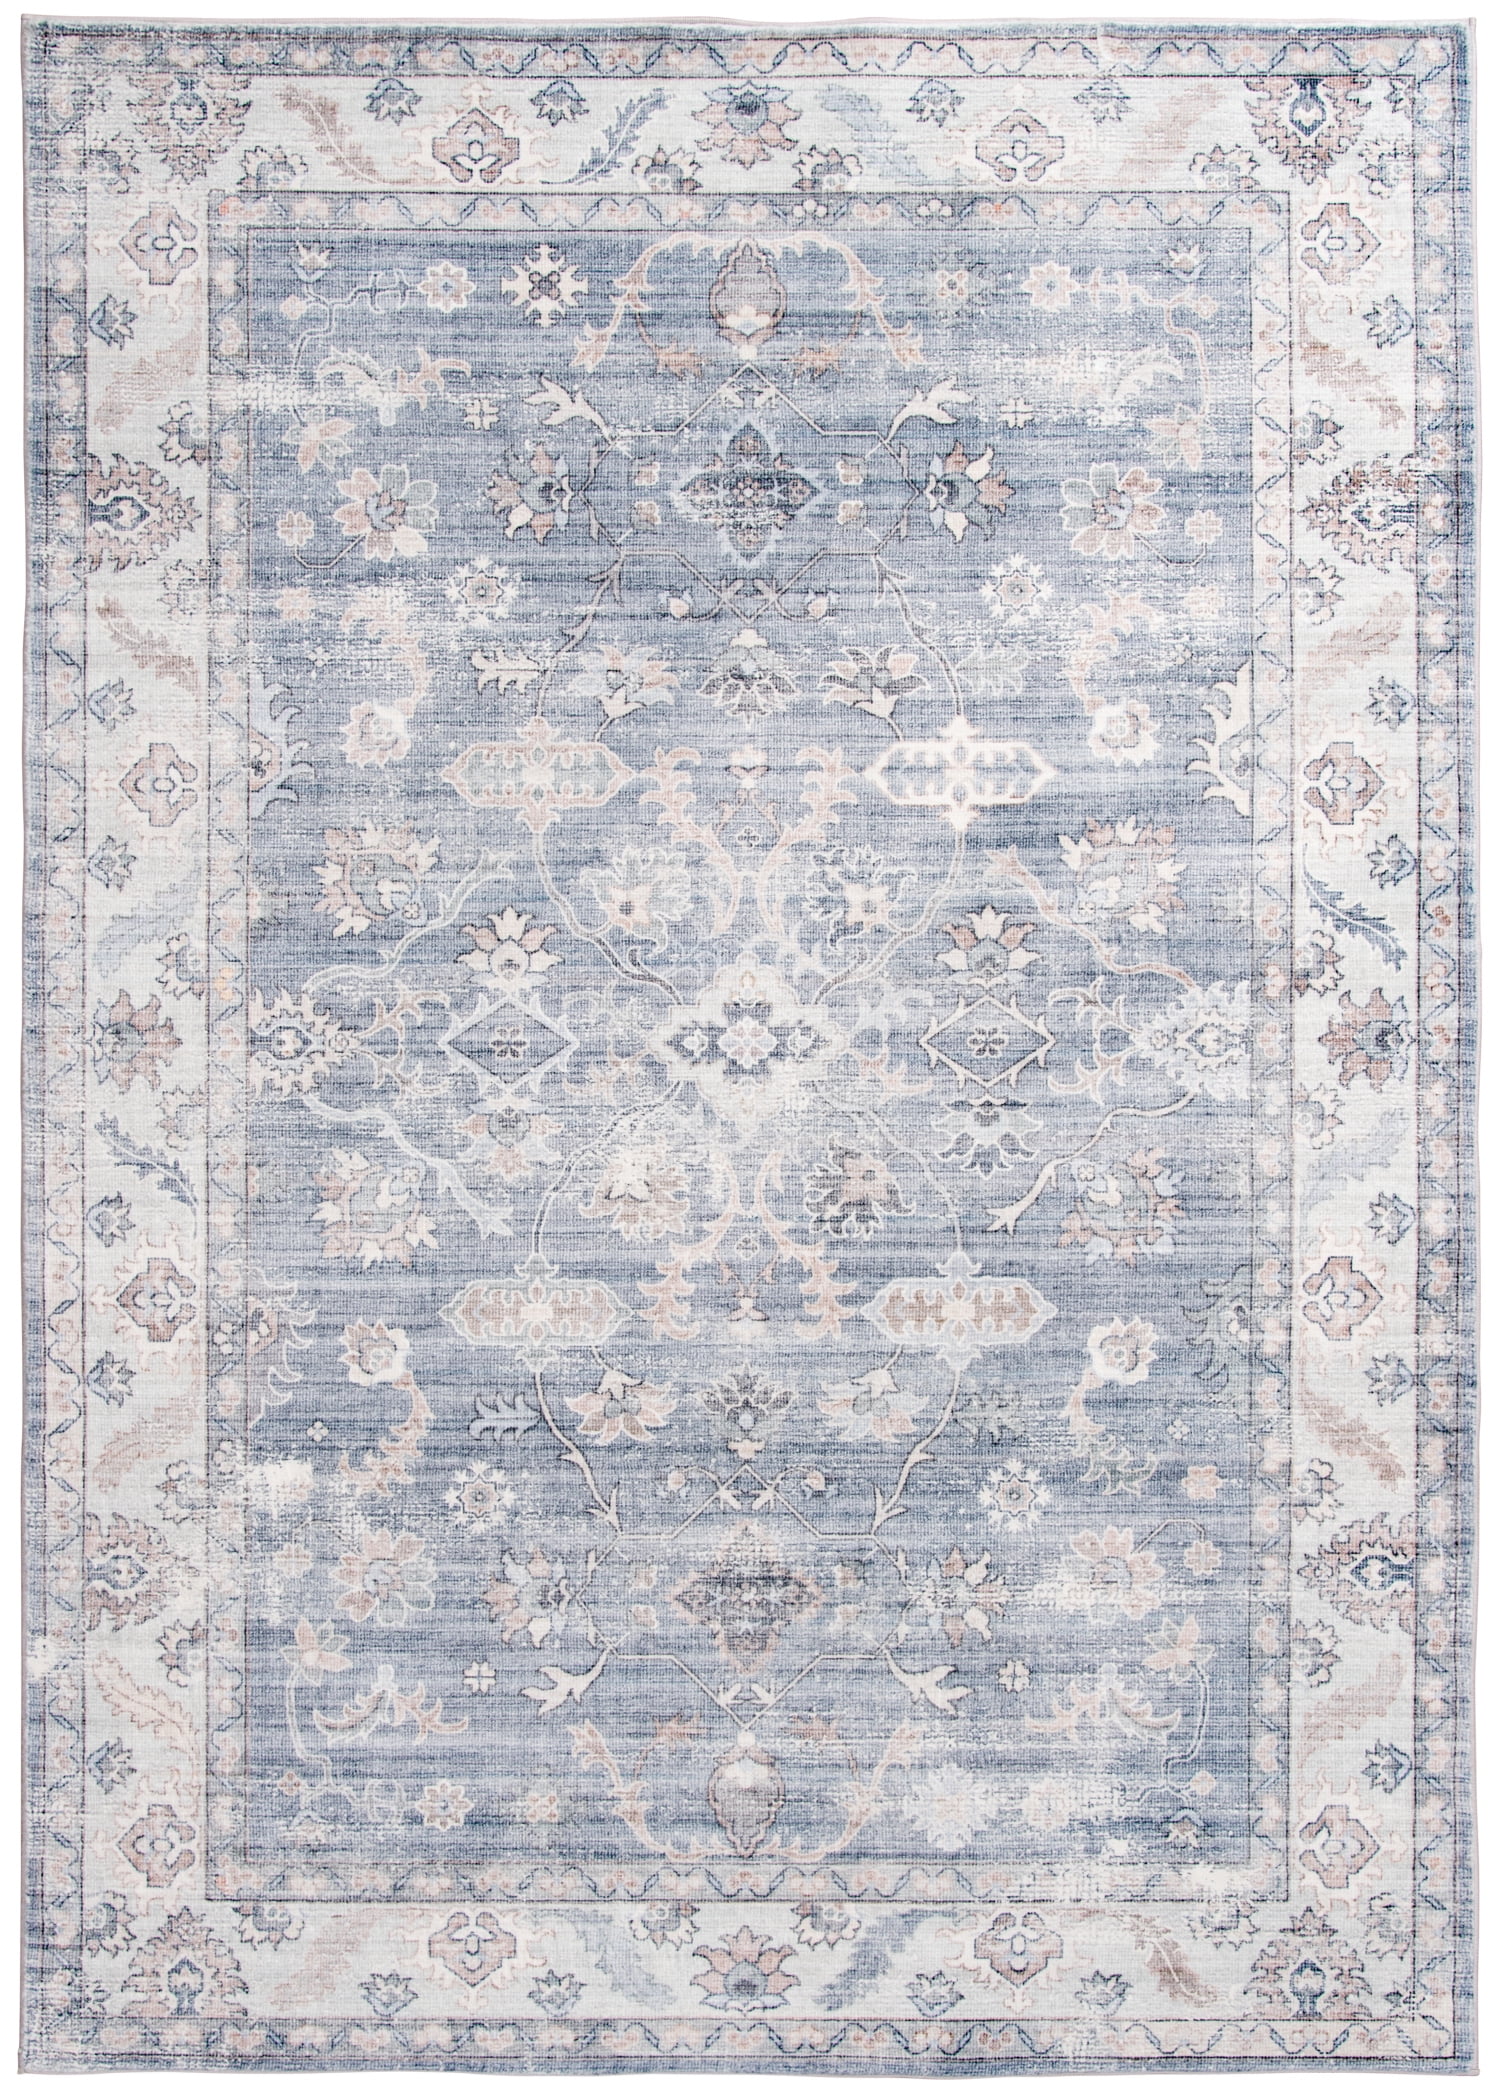 Better Homes & Gardens Washable Persian Area Rug, Blue, 5'x7'